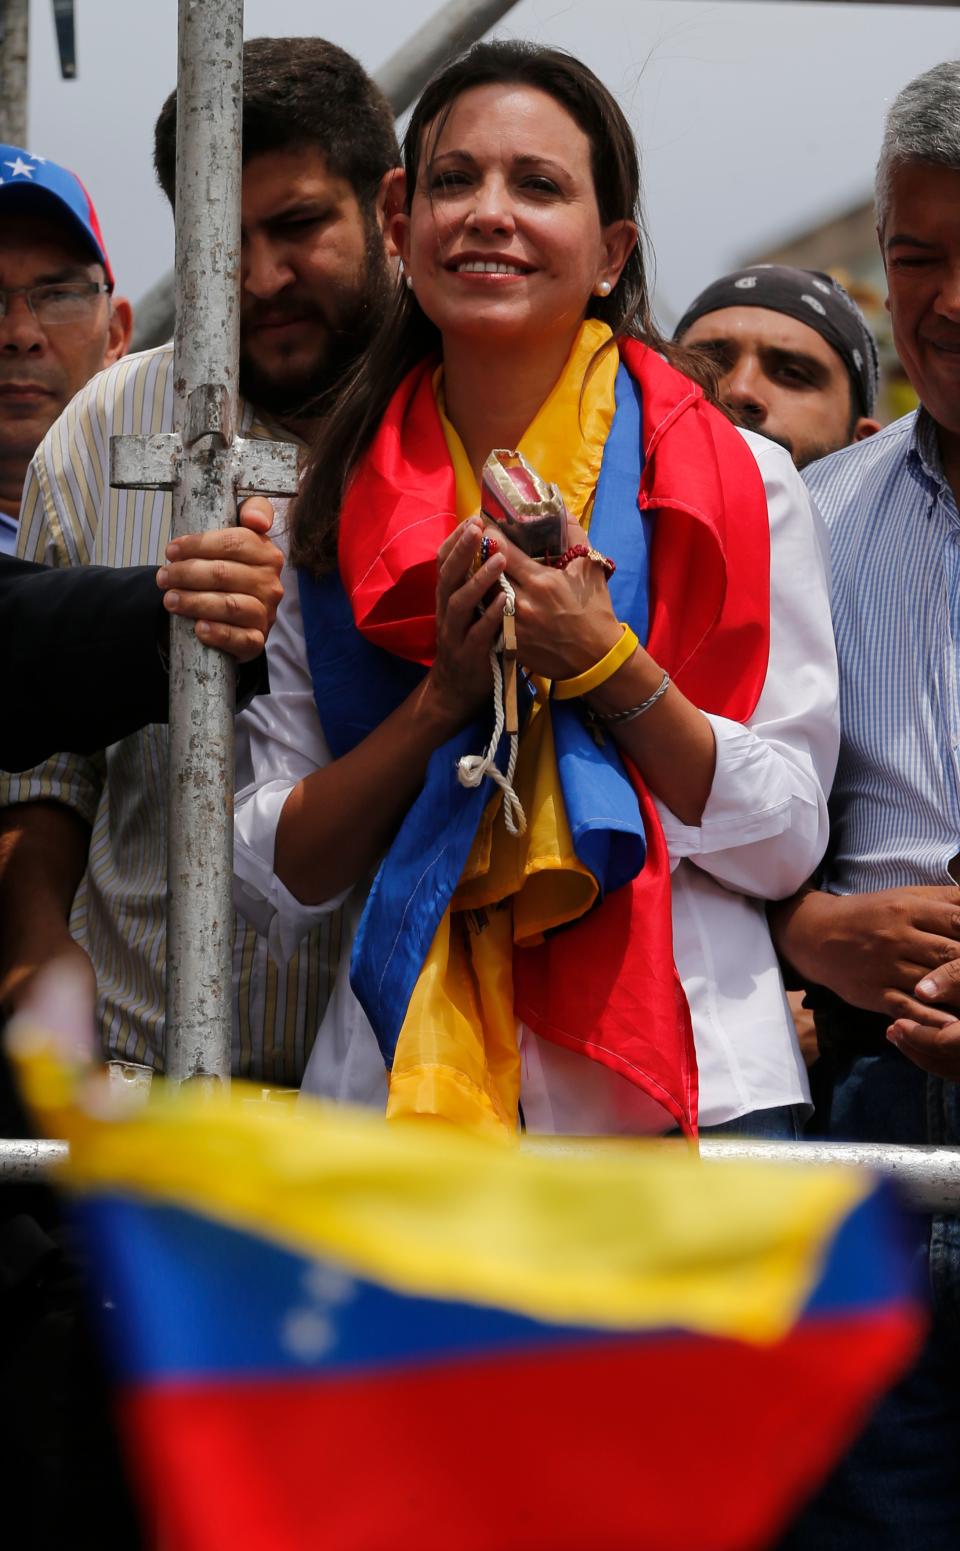 Maria Corina Machado, is surrounded by colleagues during a rally in Caracas, Venezuela, Tuesday, April 1, 2014. Protesters wearing white T-shirts and hats in the red, yellow and blue, of Venezuela's flag have gathered to cheer the opposition lawmaker who was stripped of her seat in congress by the government last week. This is Machado's first major public appearance since Venezuela's Supreme Court confirmed the stripping of Machado's parliamentary seat after she addressed the Organization of American States at the invitation of Panama. (AP Photo/Fernando Llano)